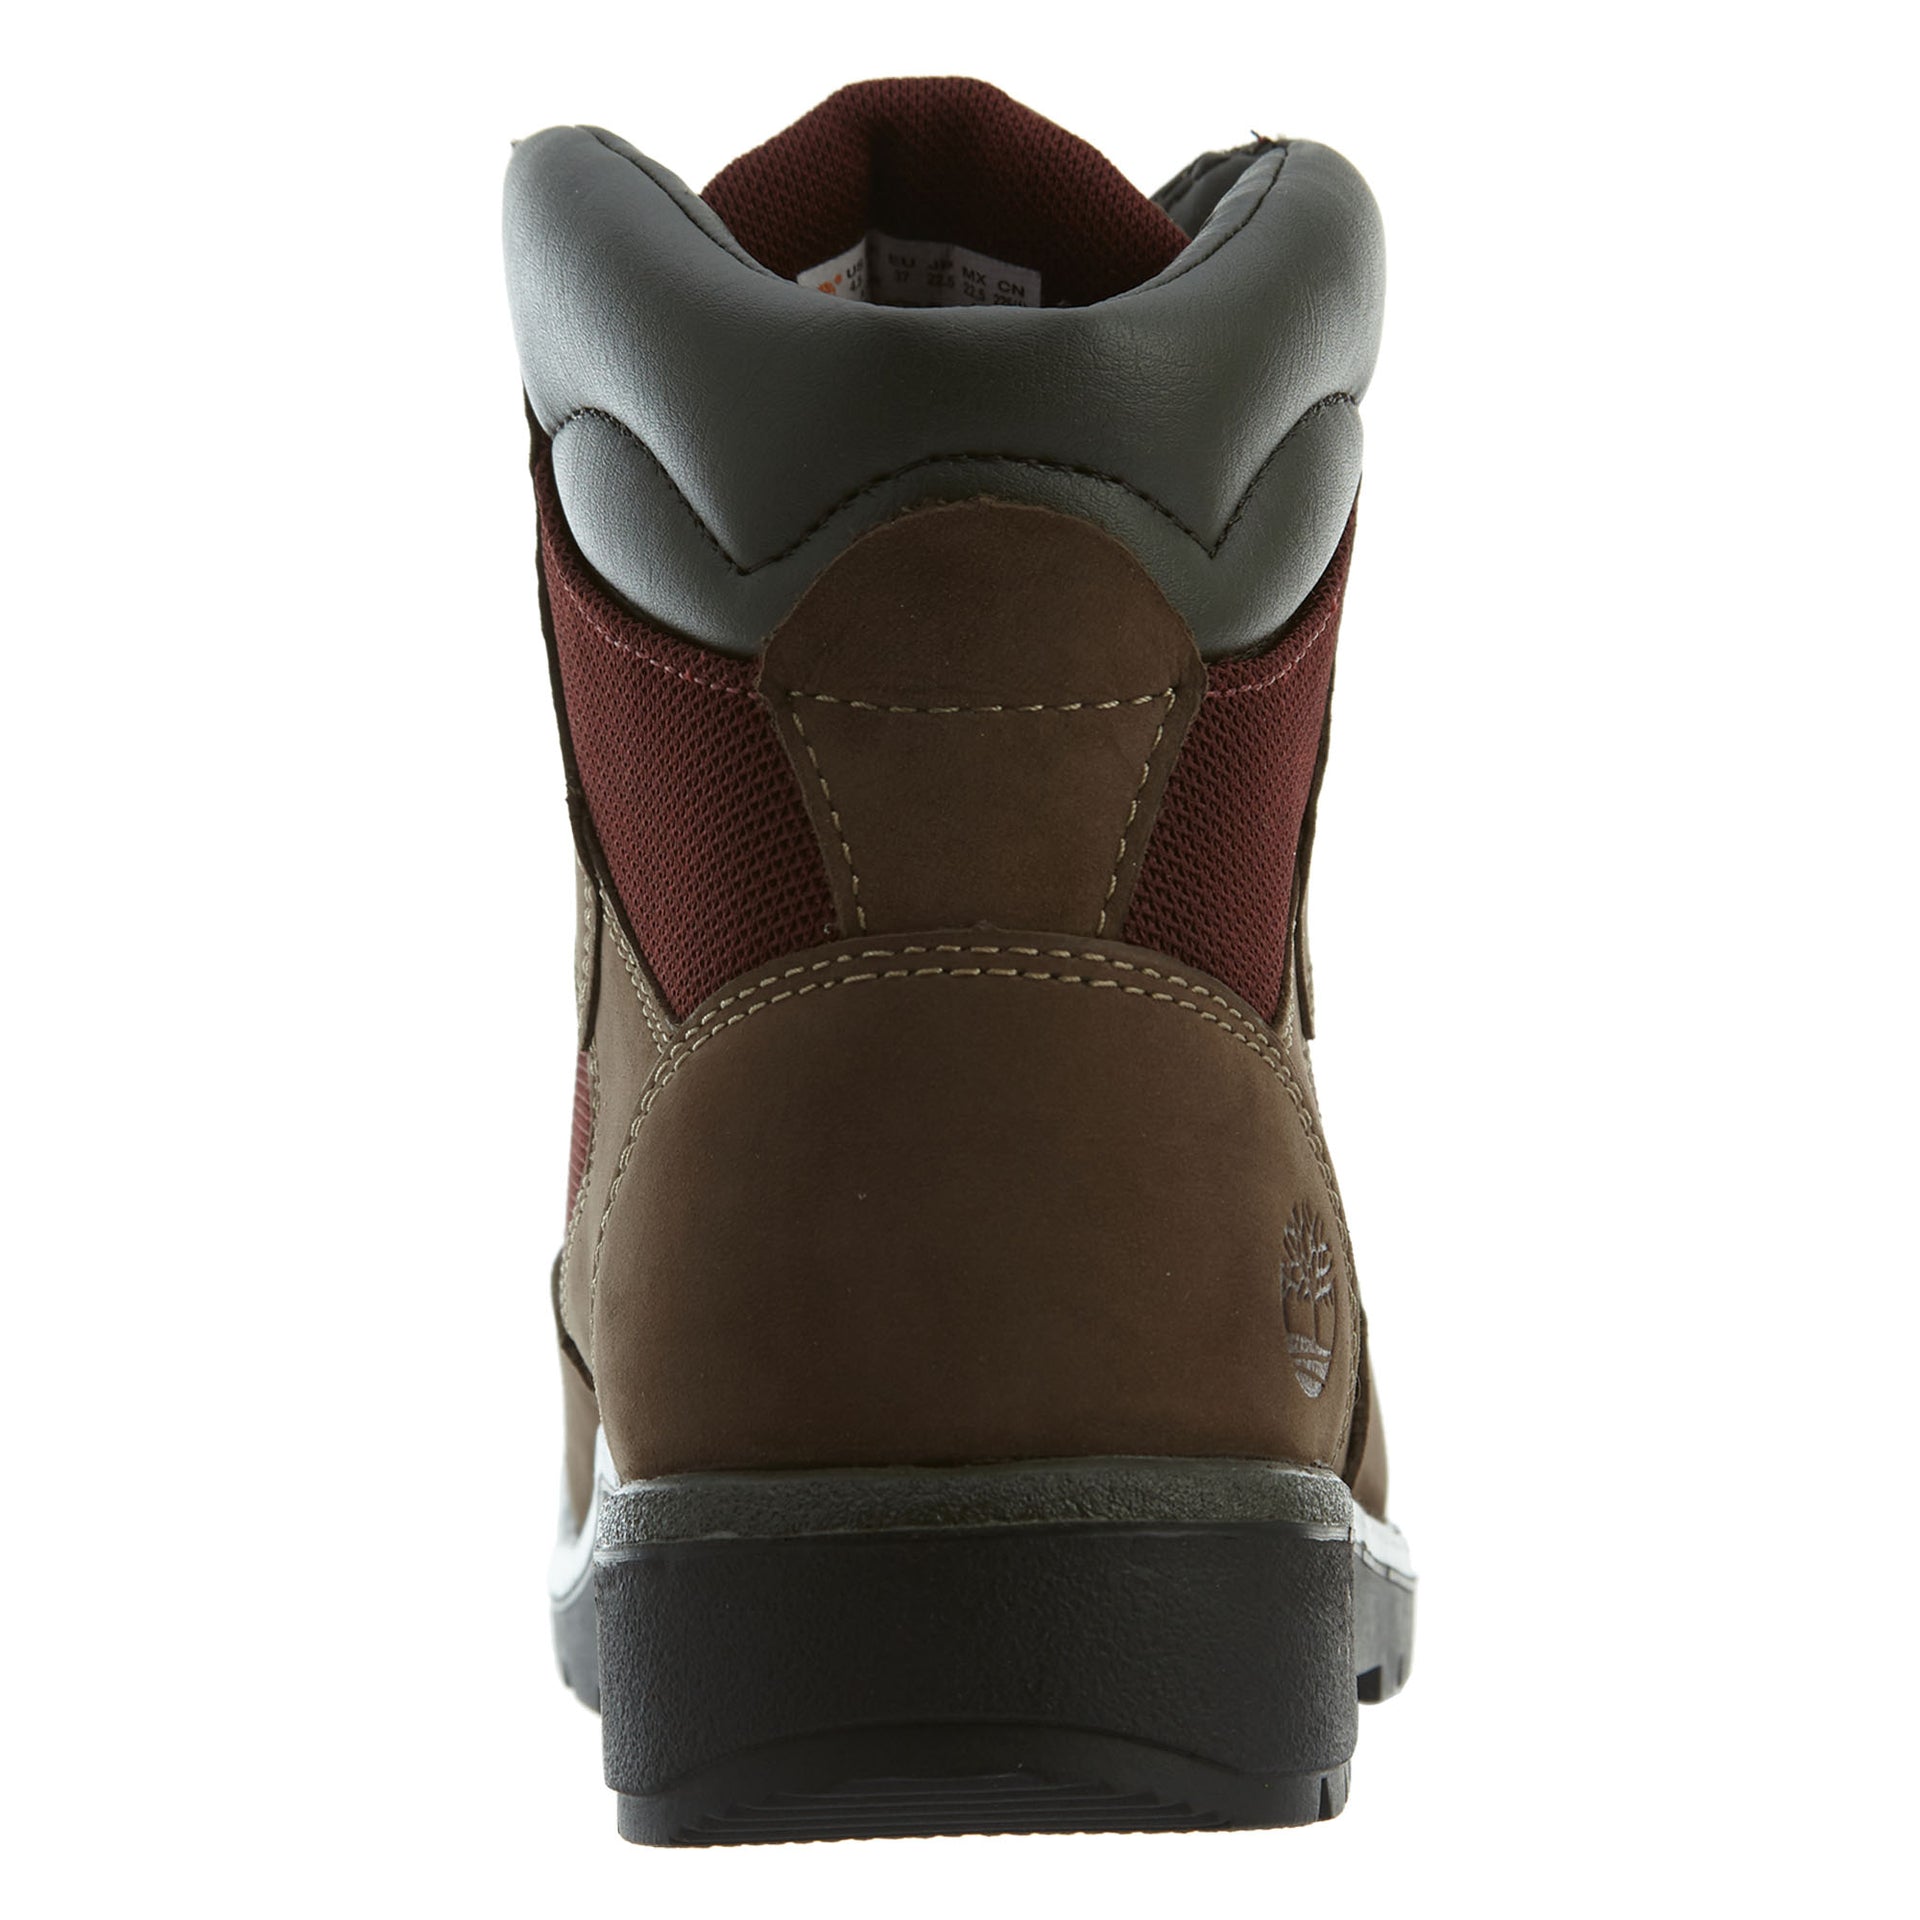 Timberland 6" Field Boots Big Kids Style : Tb0a1y4w-D40